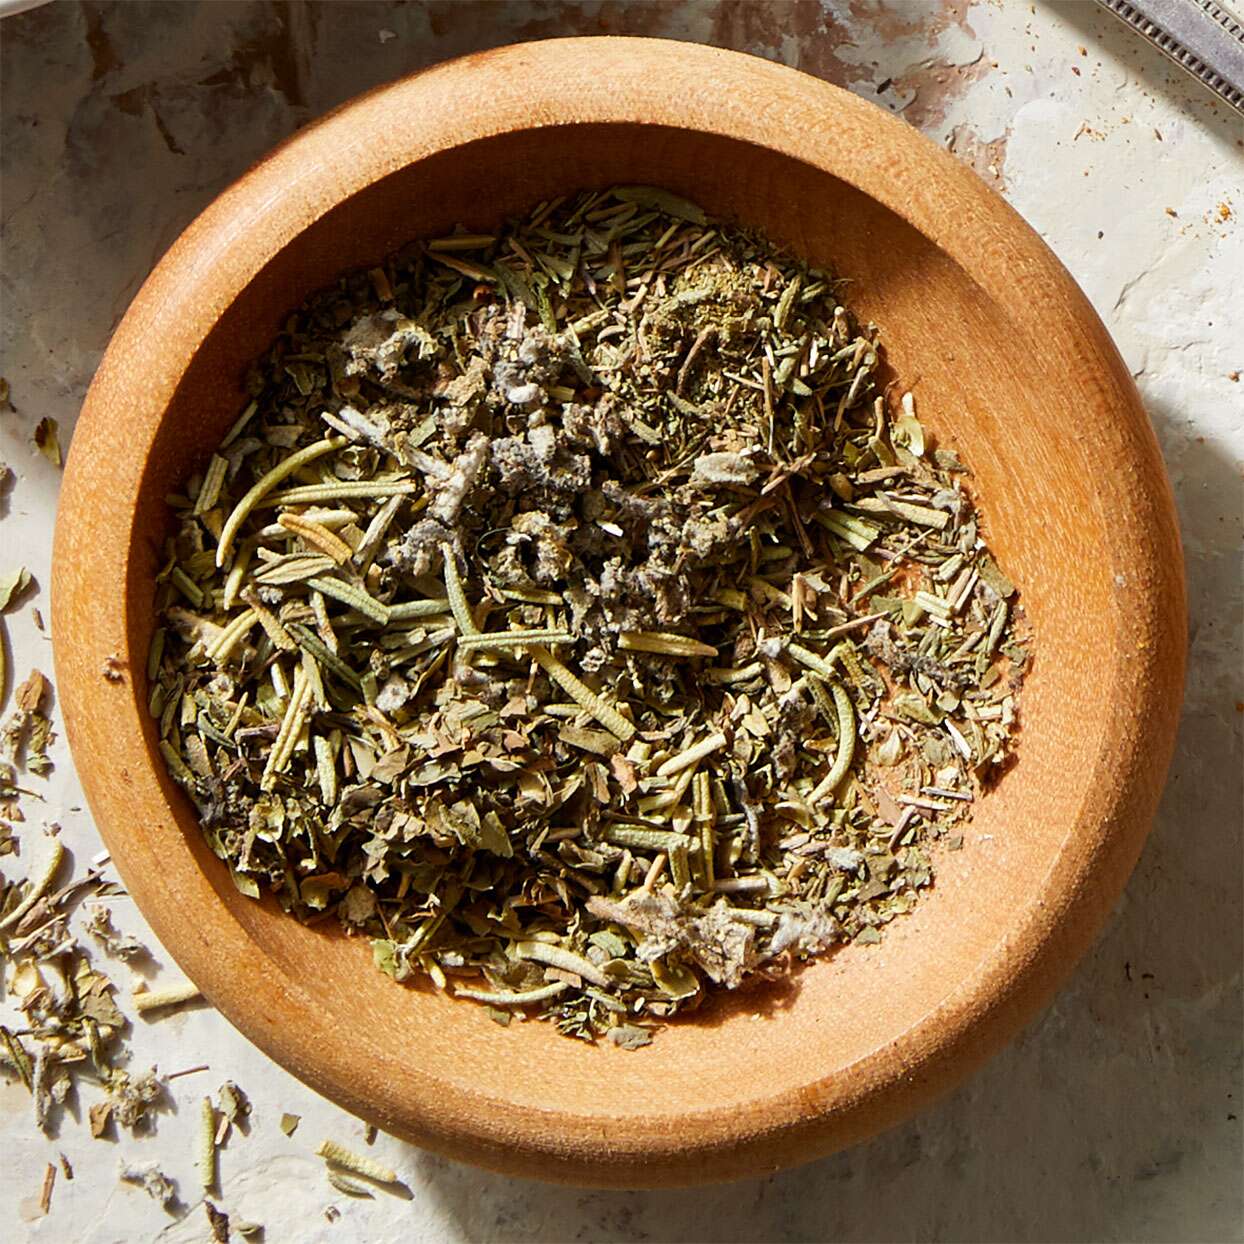 Cooking with Mediterranean herbs